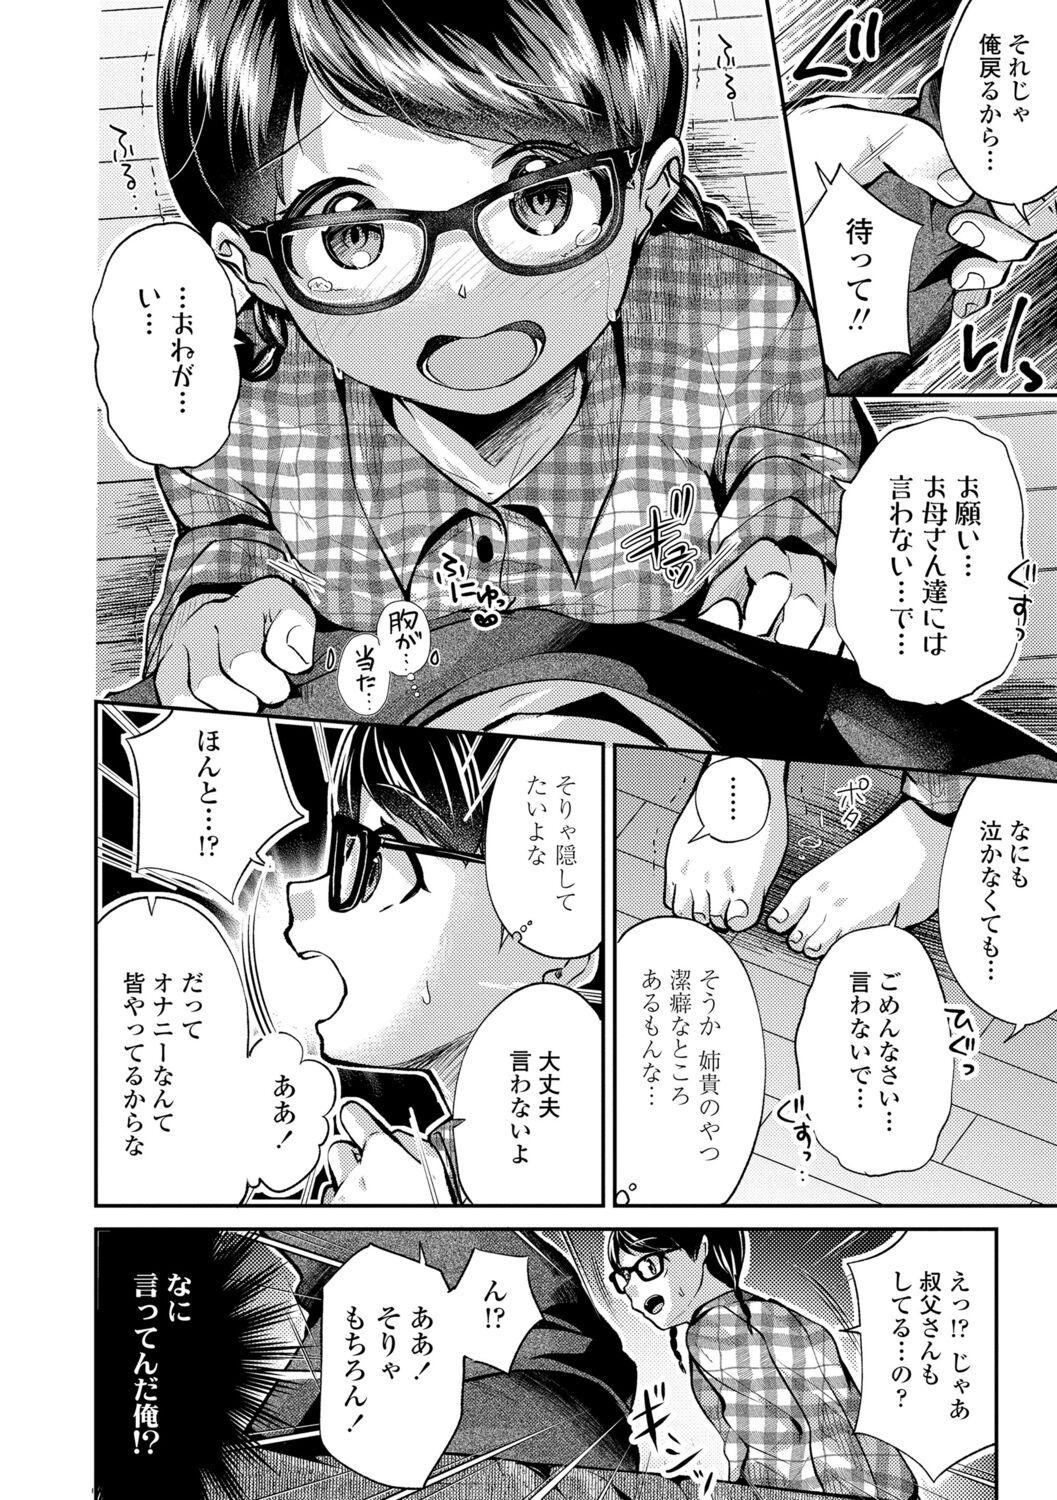 Online Shishunki wa Ichido dake - The one and only adolescence. Married - Page 6